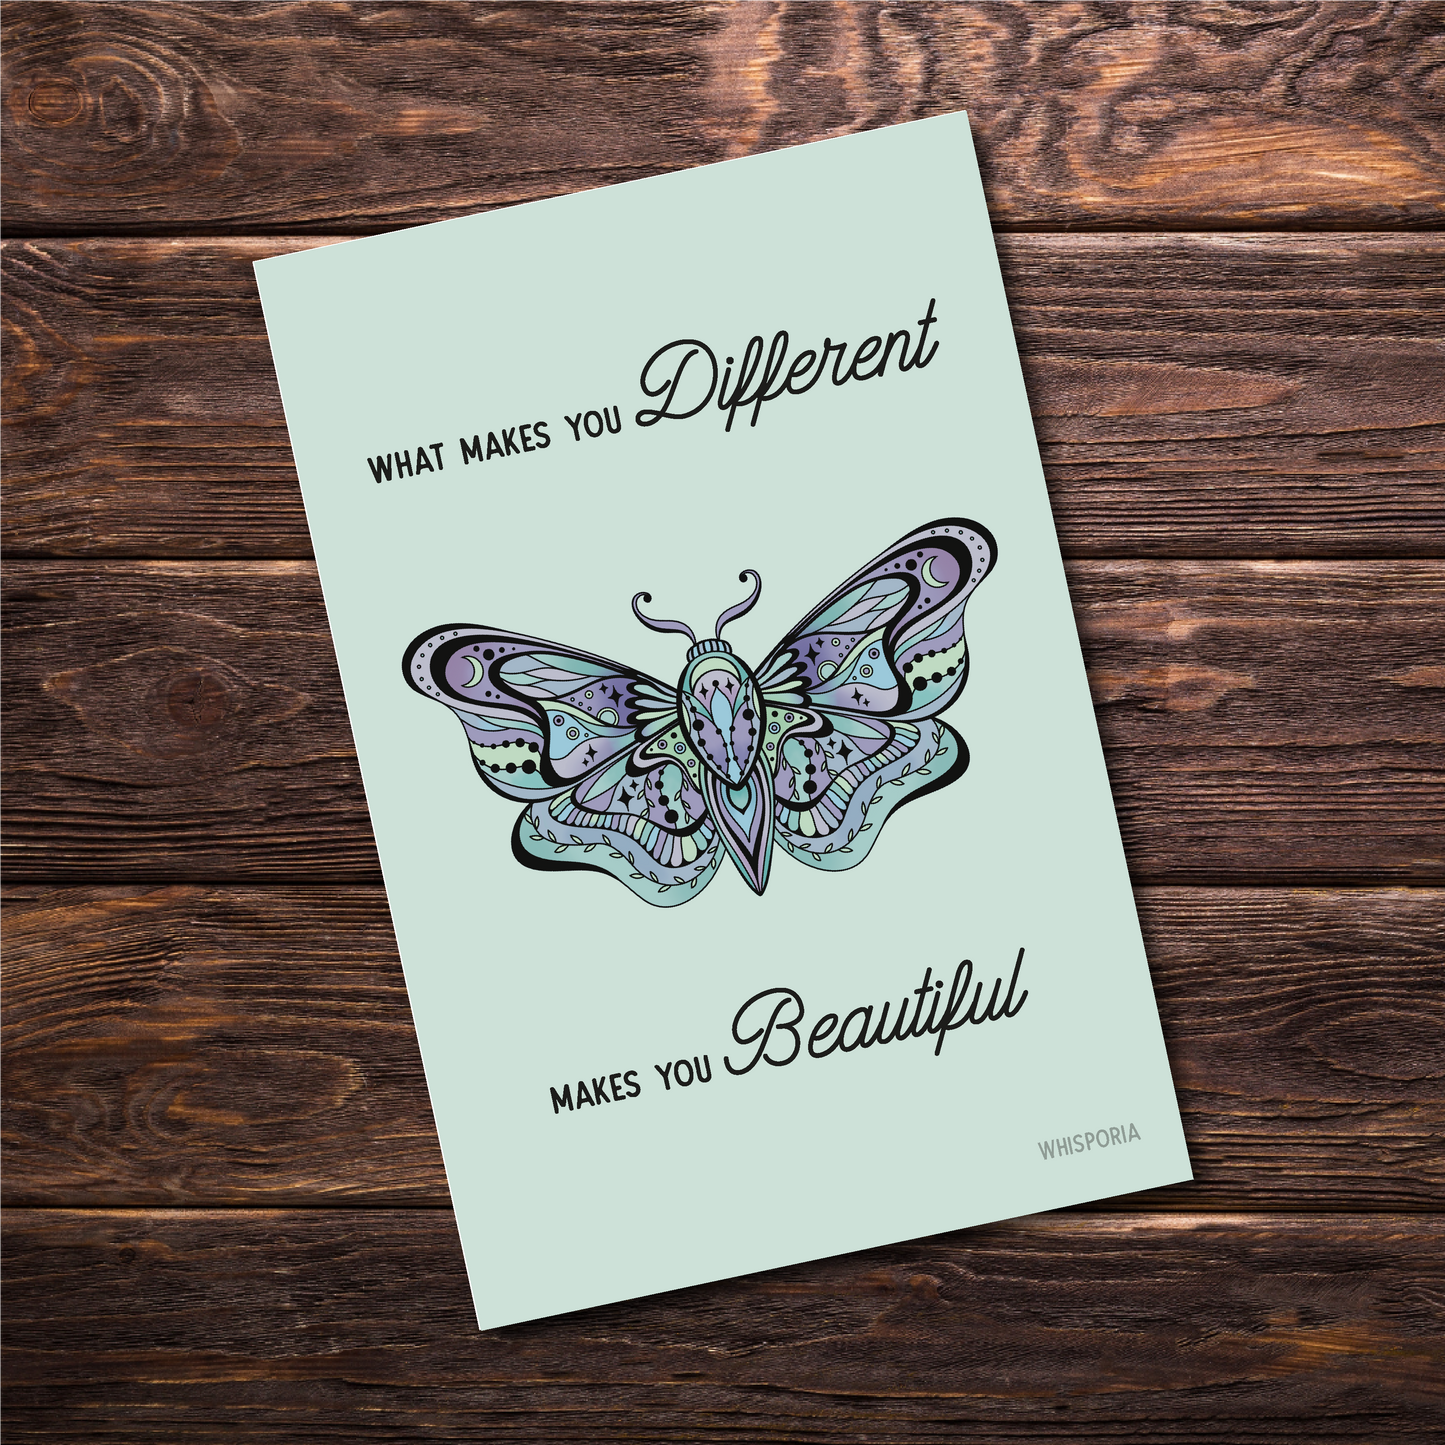 What makes you Different A6 Print and Journaling Card